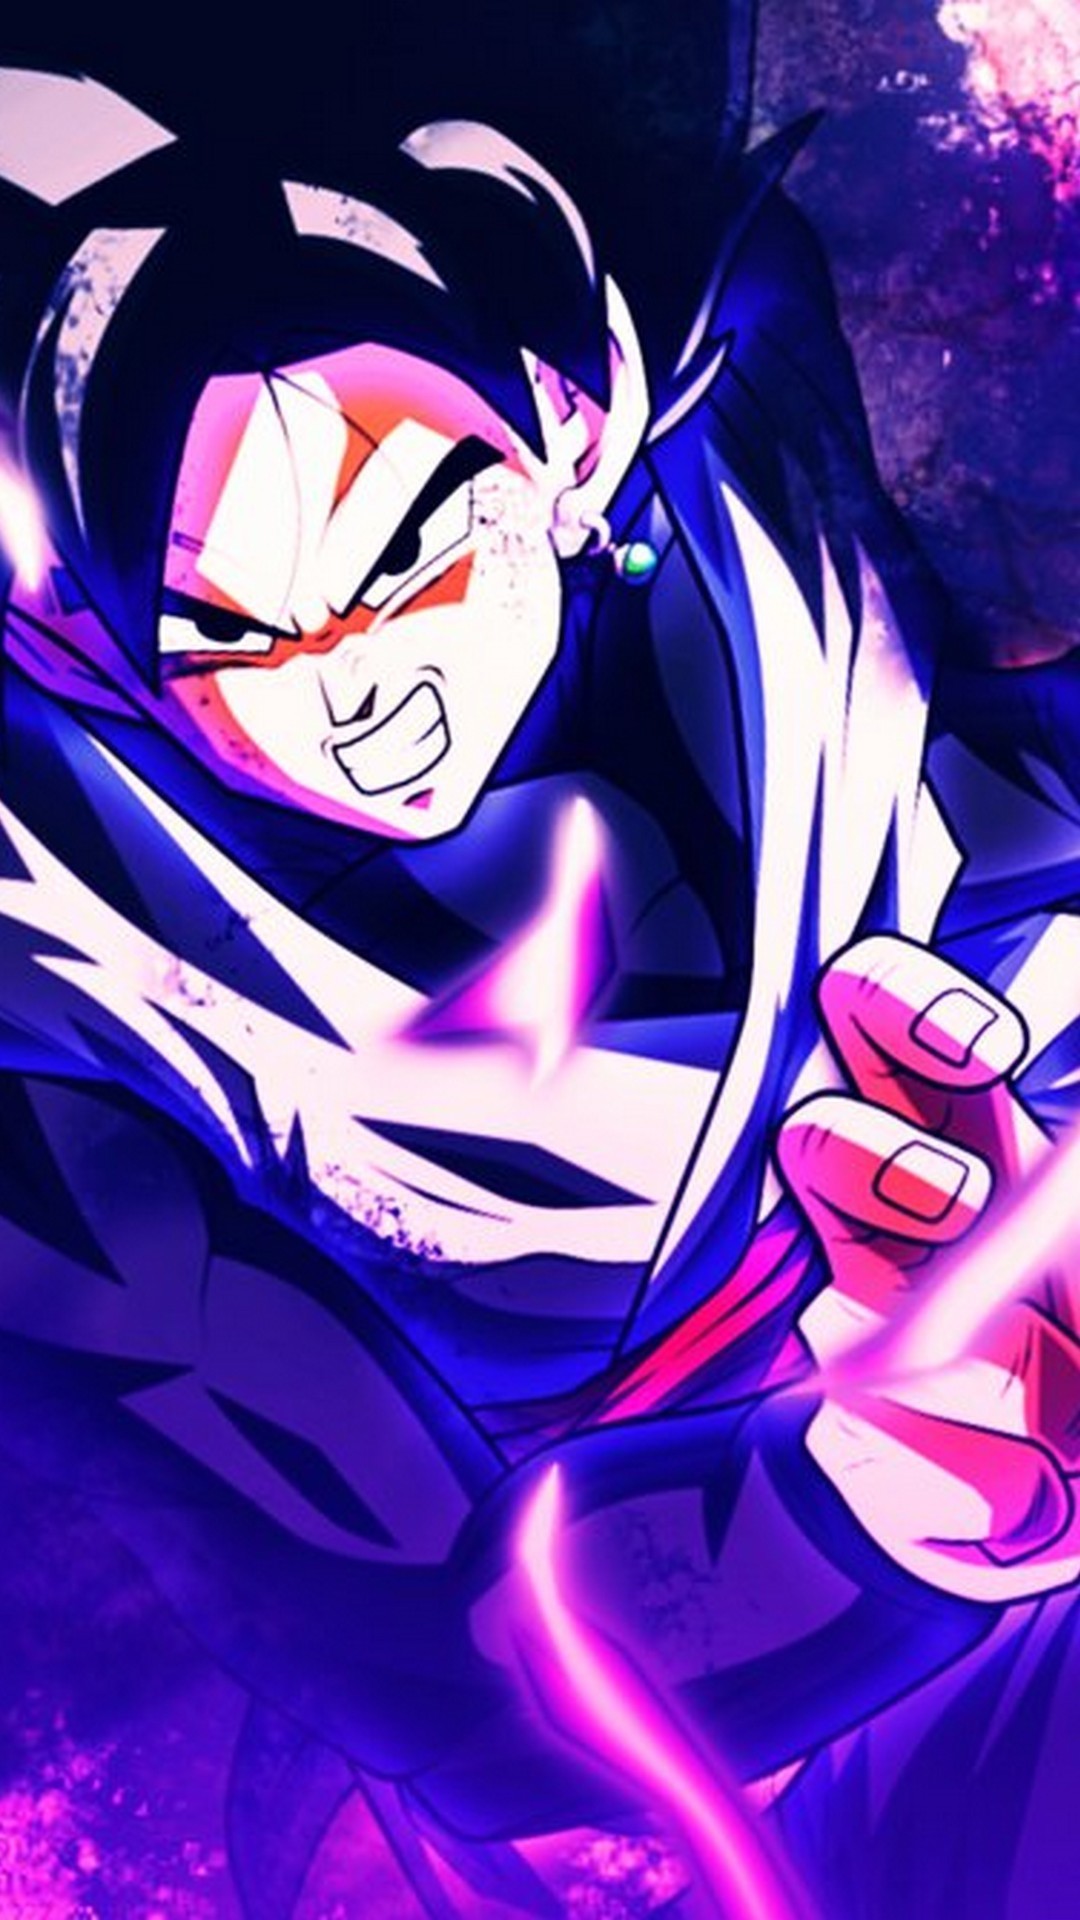 Wallpaper Black Goku iPhone with resolution 1080X1920 pixel. You can make this wallpaper for your iPhone 5, 6, 7, 8, X backgrounds, Mobile Screensaver, or iPad Lock Screen